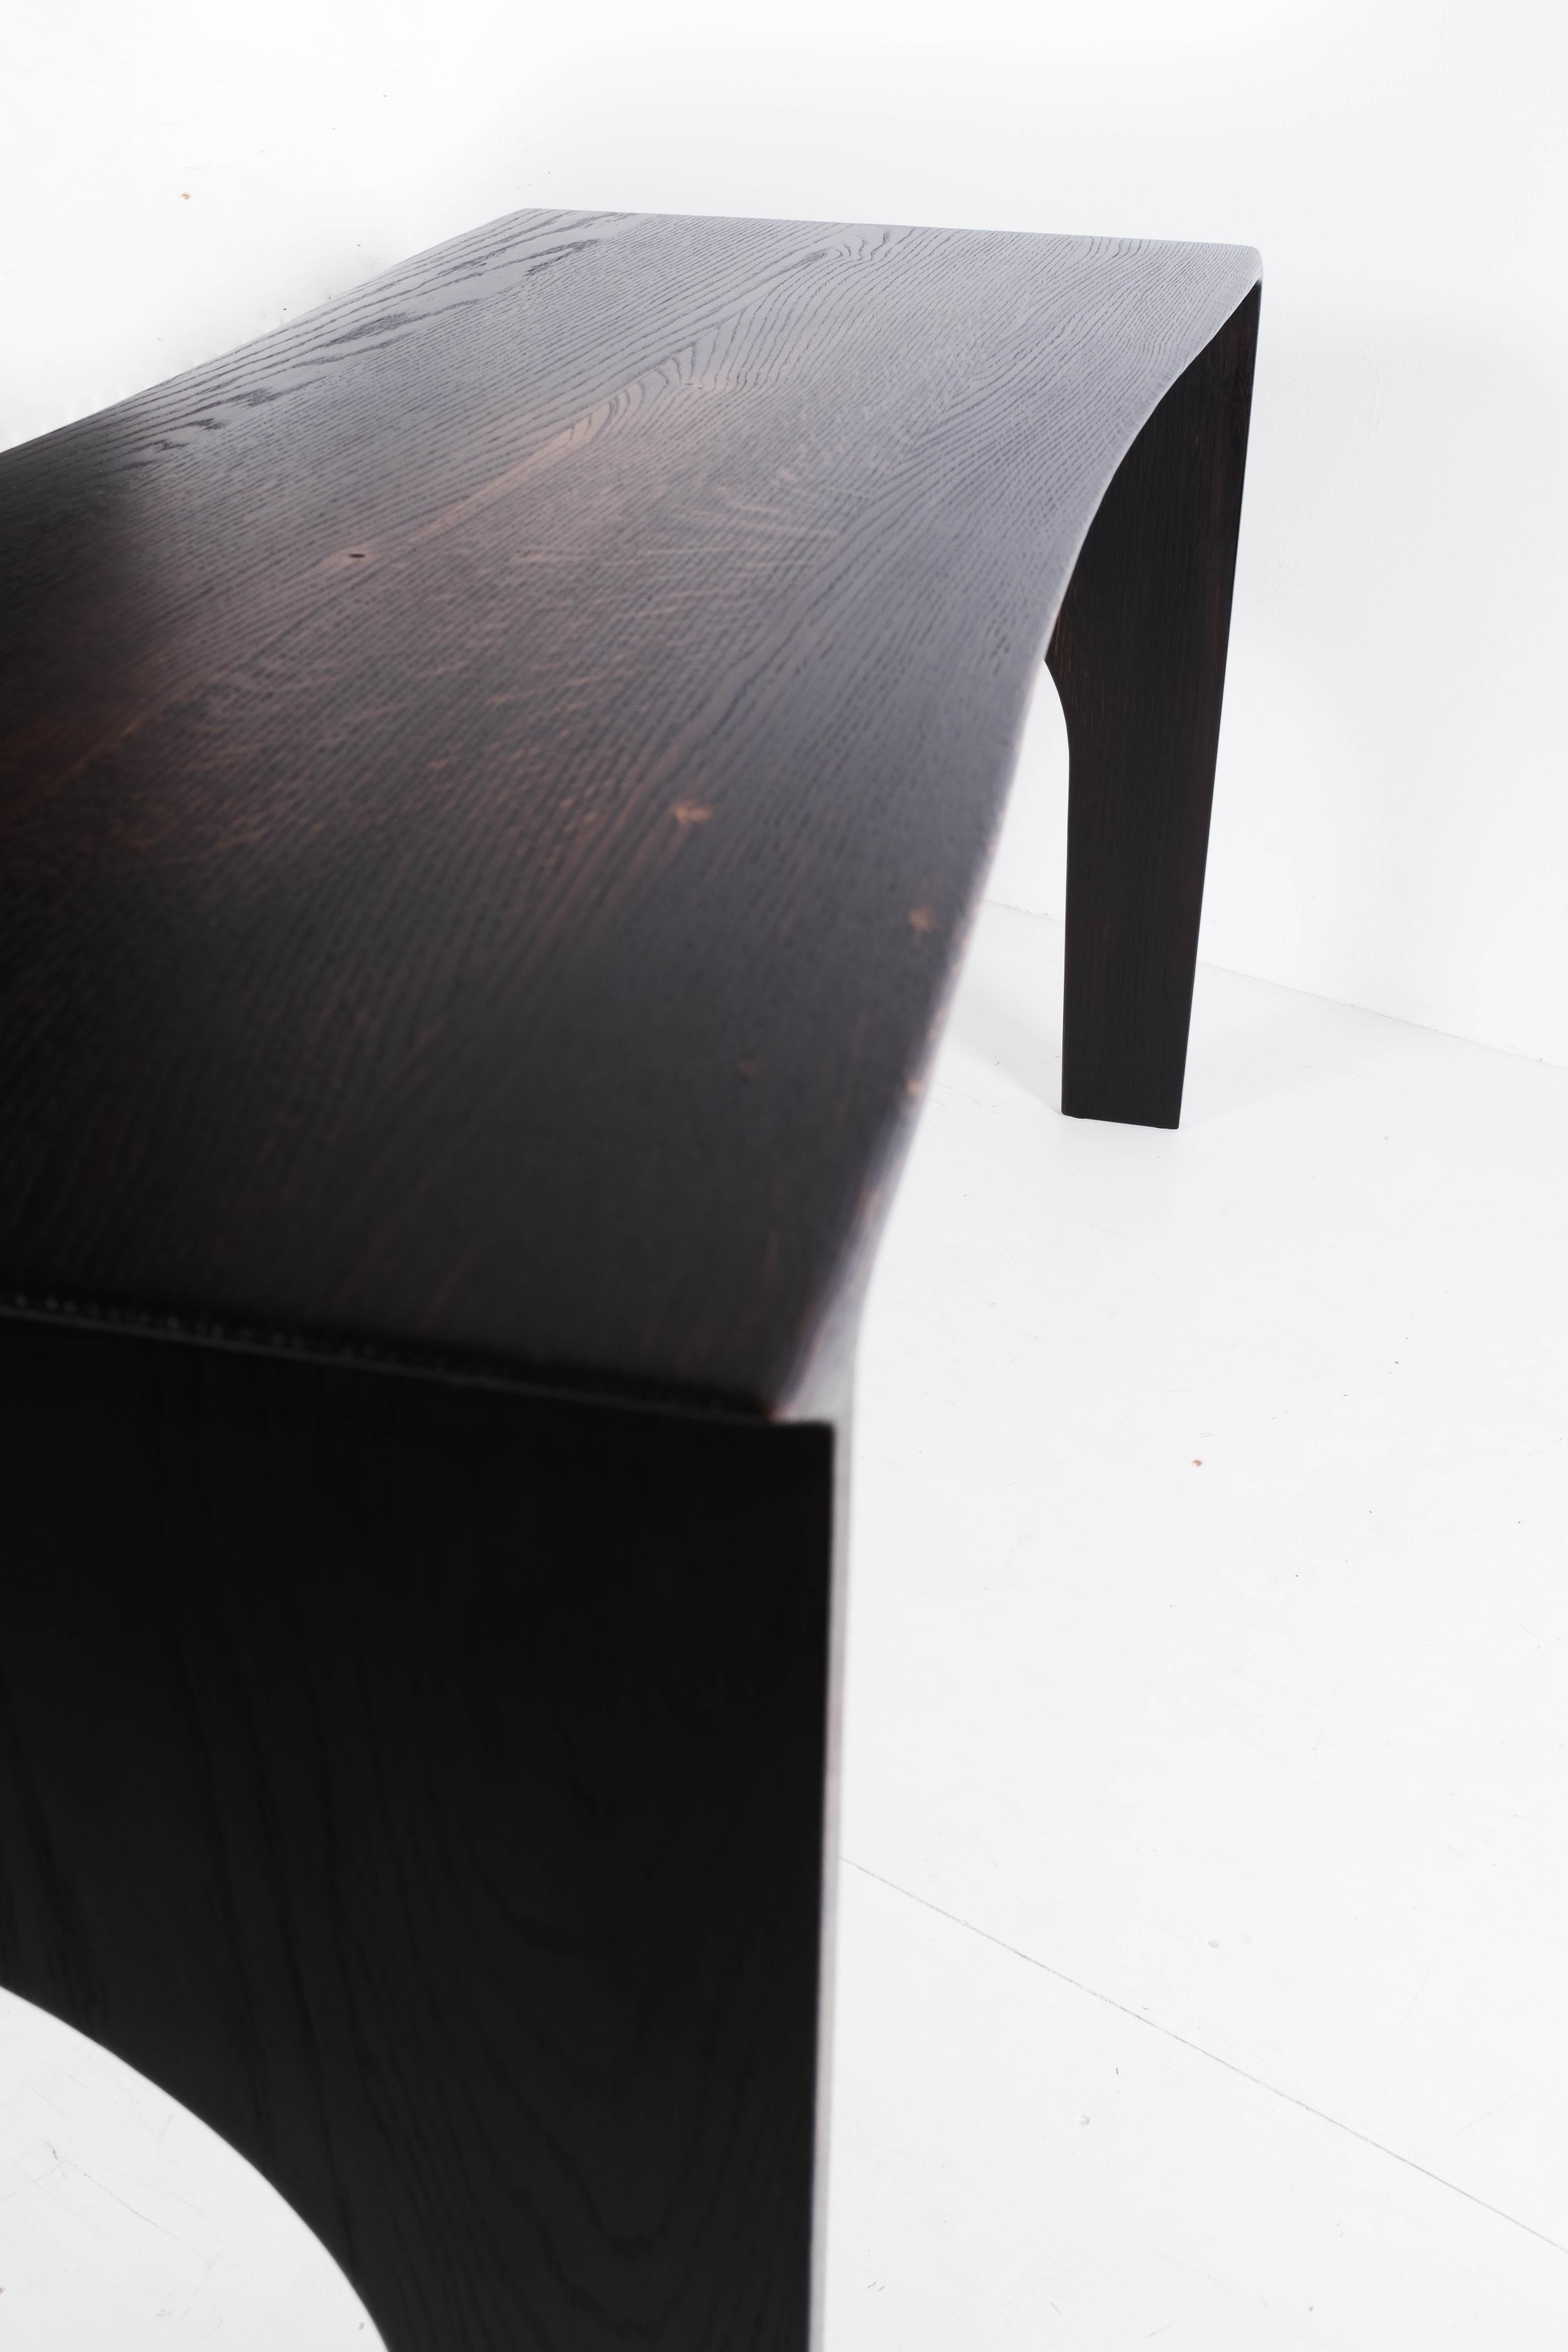 Solid oak sculptural desk by Lukas Cober
160 x 60 x 75 cm
Could be made to order in other dimension
Material / solid oak wood
Finish / burned, waxed
Variations / stool, bench, desk, dining table, coffee table

